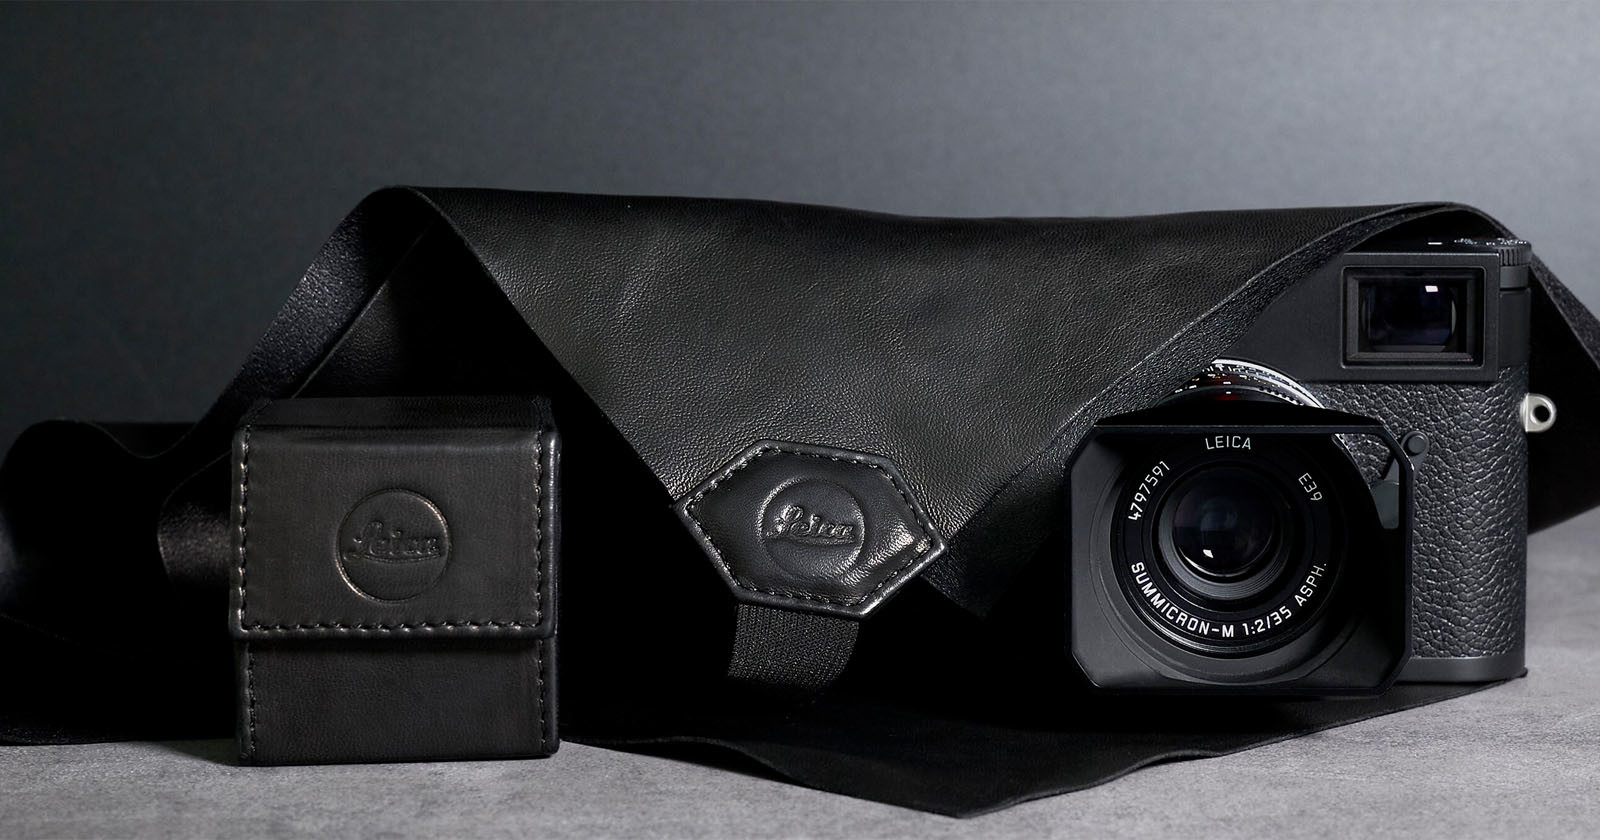 Leica Debuts a $175 Napa Leather Luxury Camera Wrapping Cloth